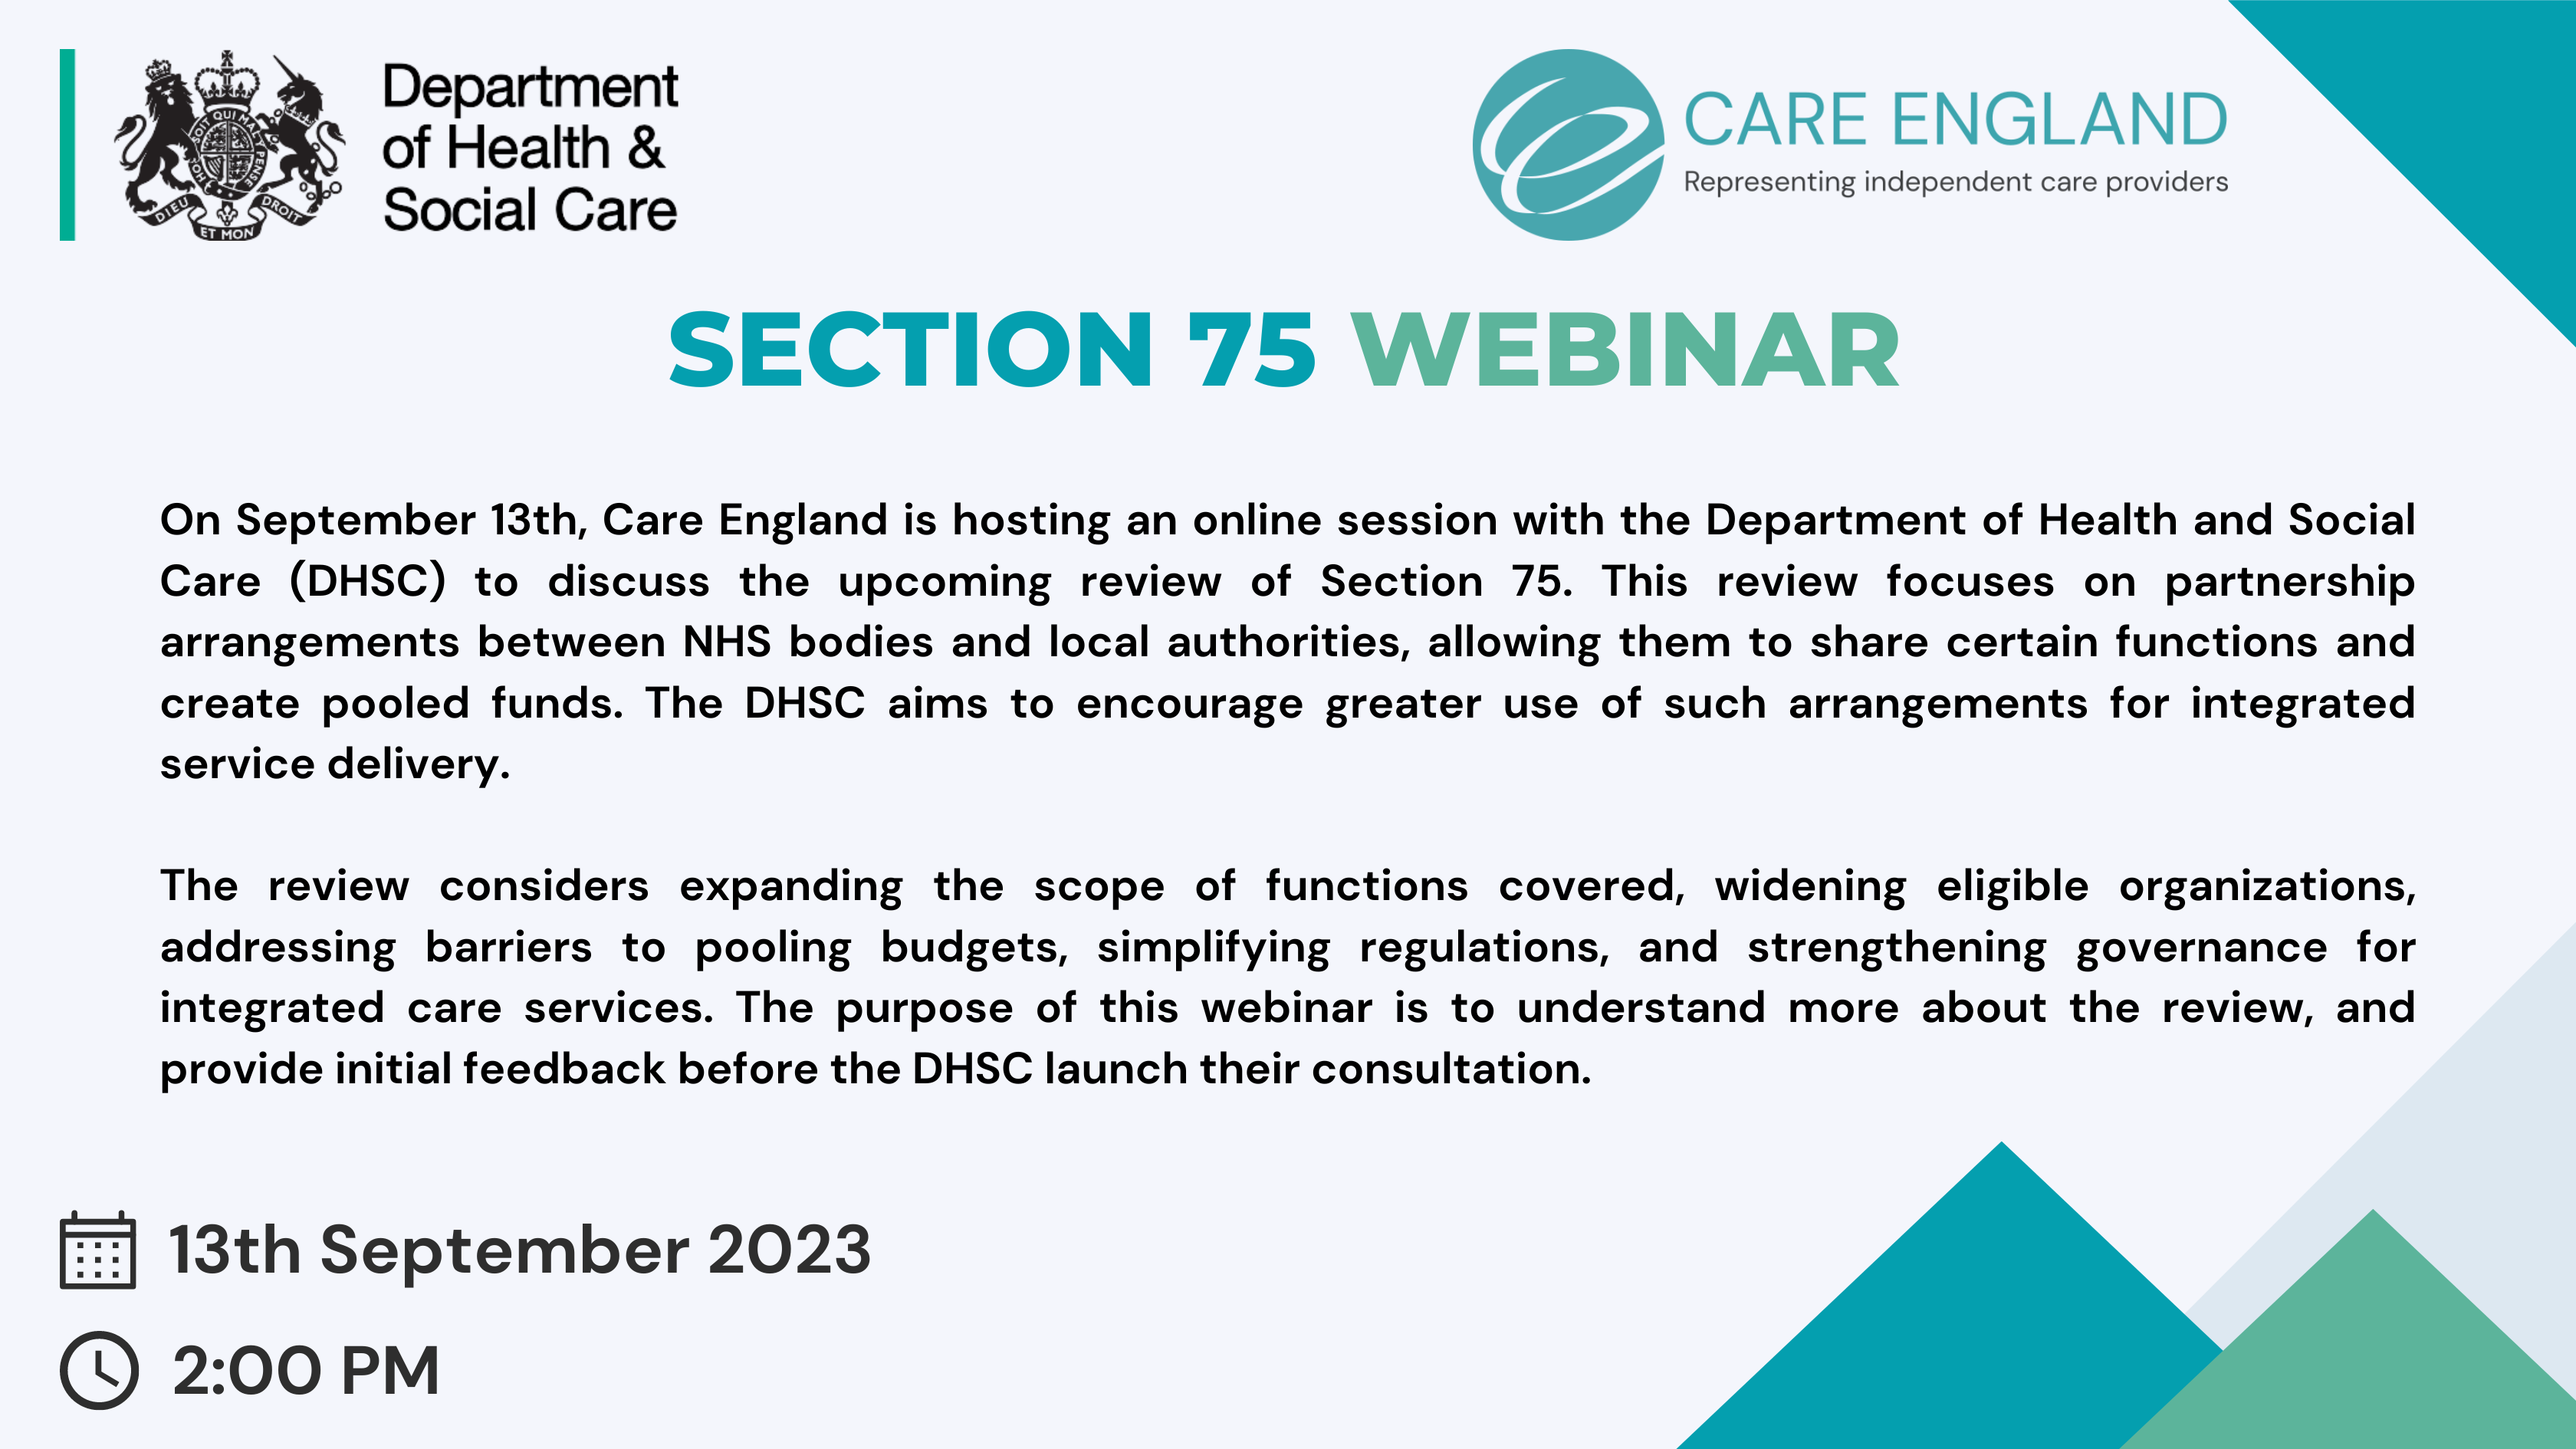 Department of Health and Social Care: Review of Section 75